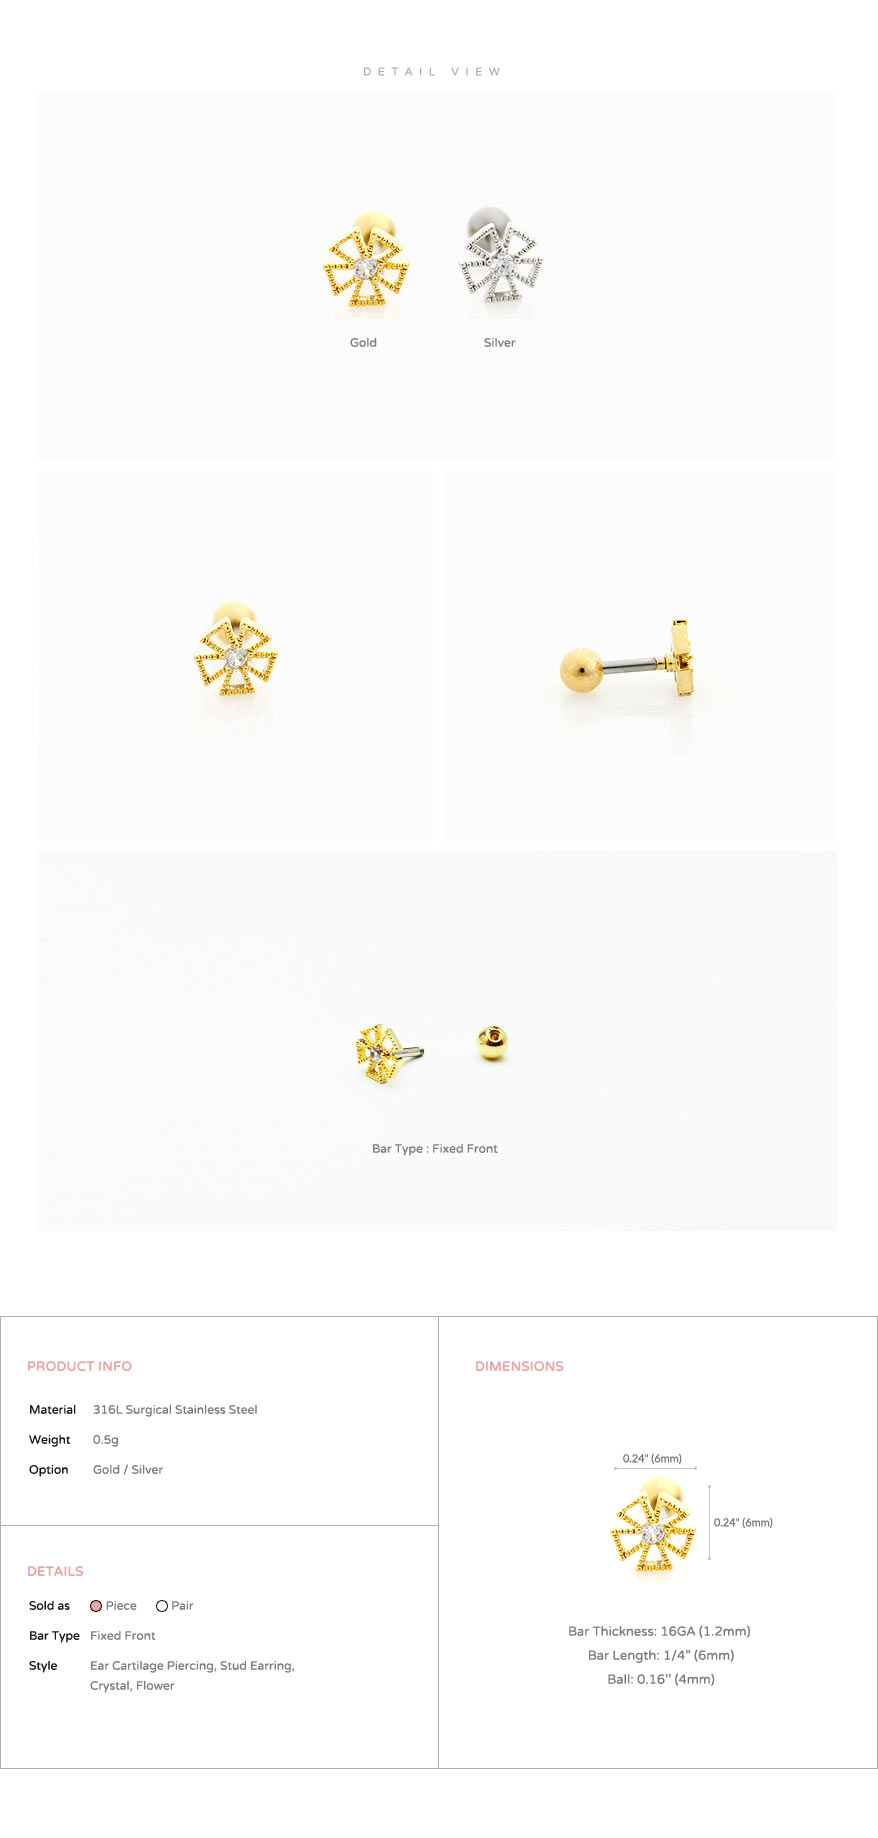 ear_studs_piercing_Cartilage_earrings_16g_316l_Surgical_Stainless_Steel_korean_asian_style_jewelry_barbell_Daisy_flower_crystal_5